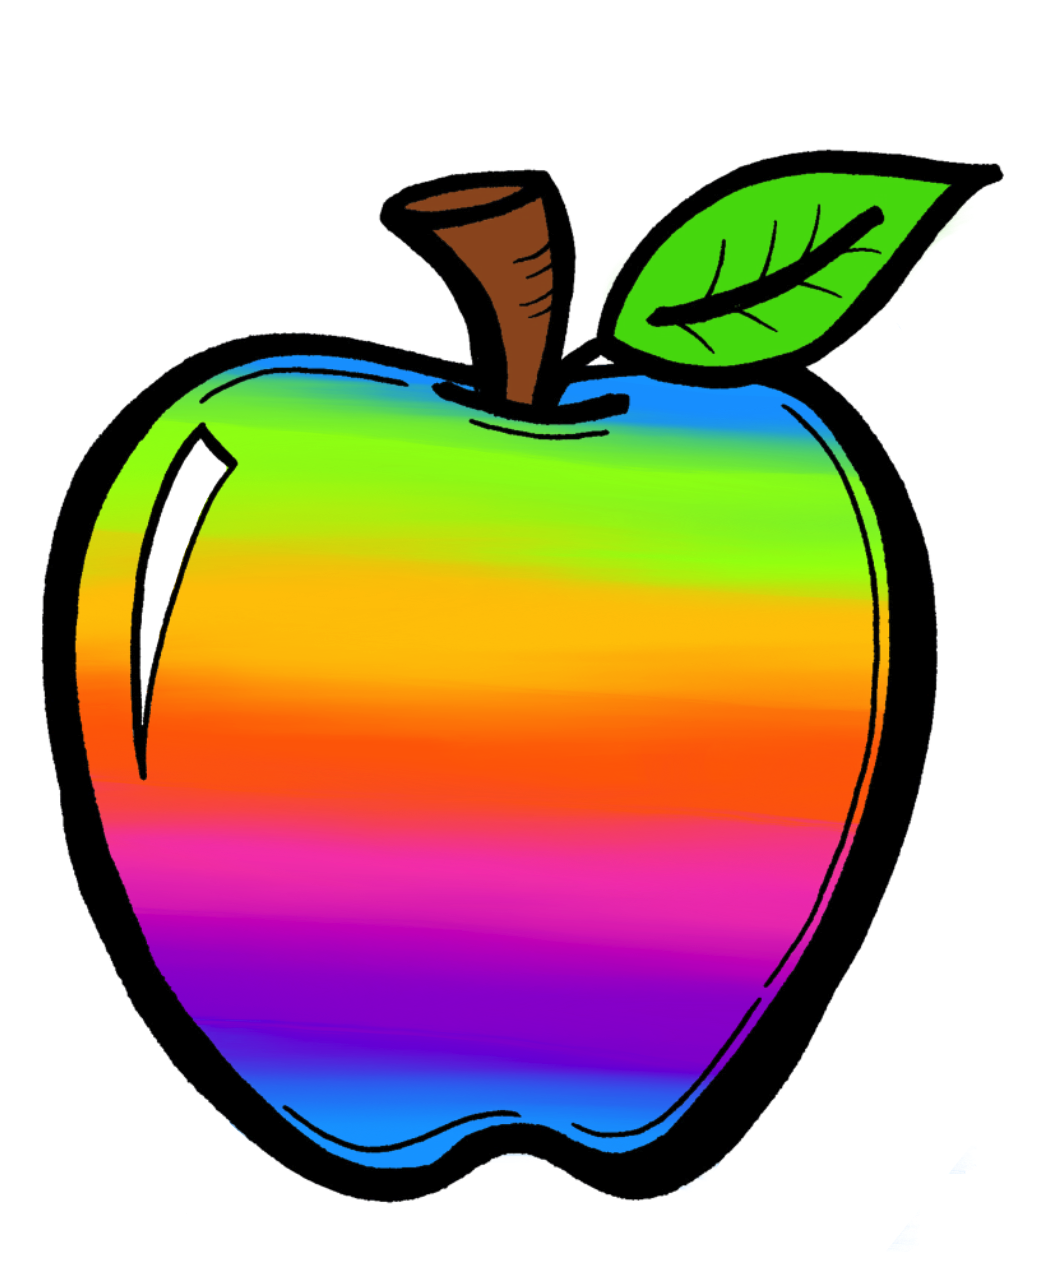 clip art images of apples - photo #46